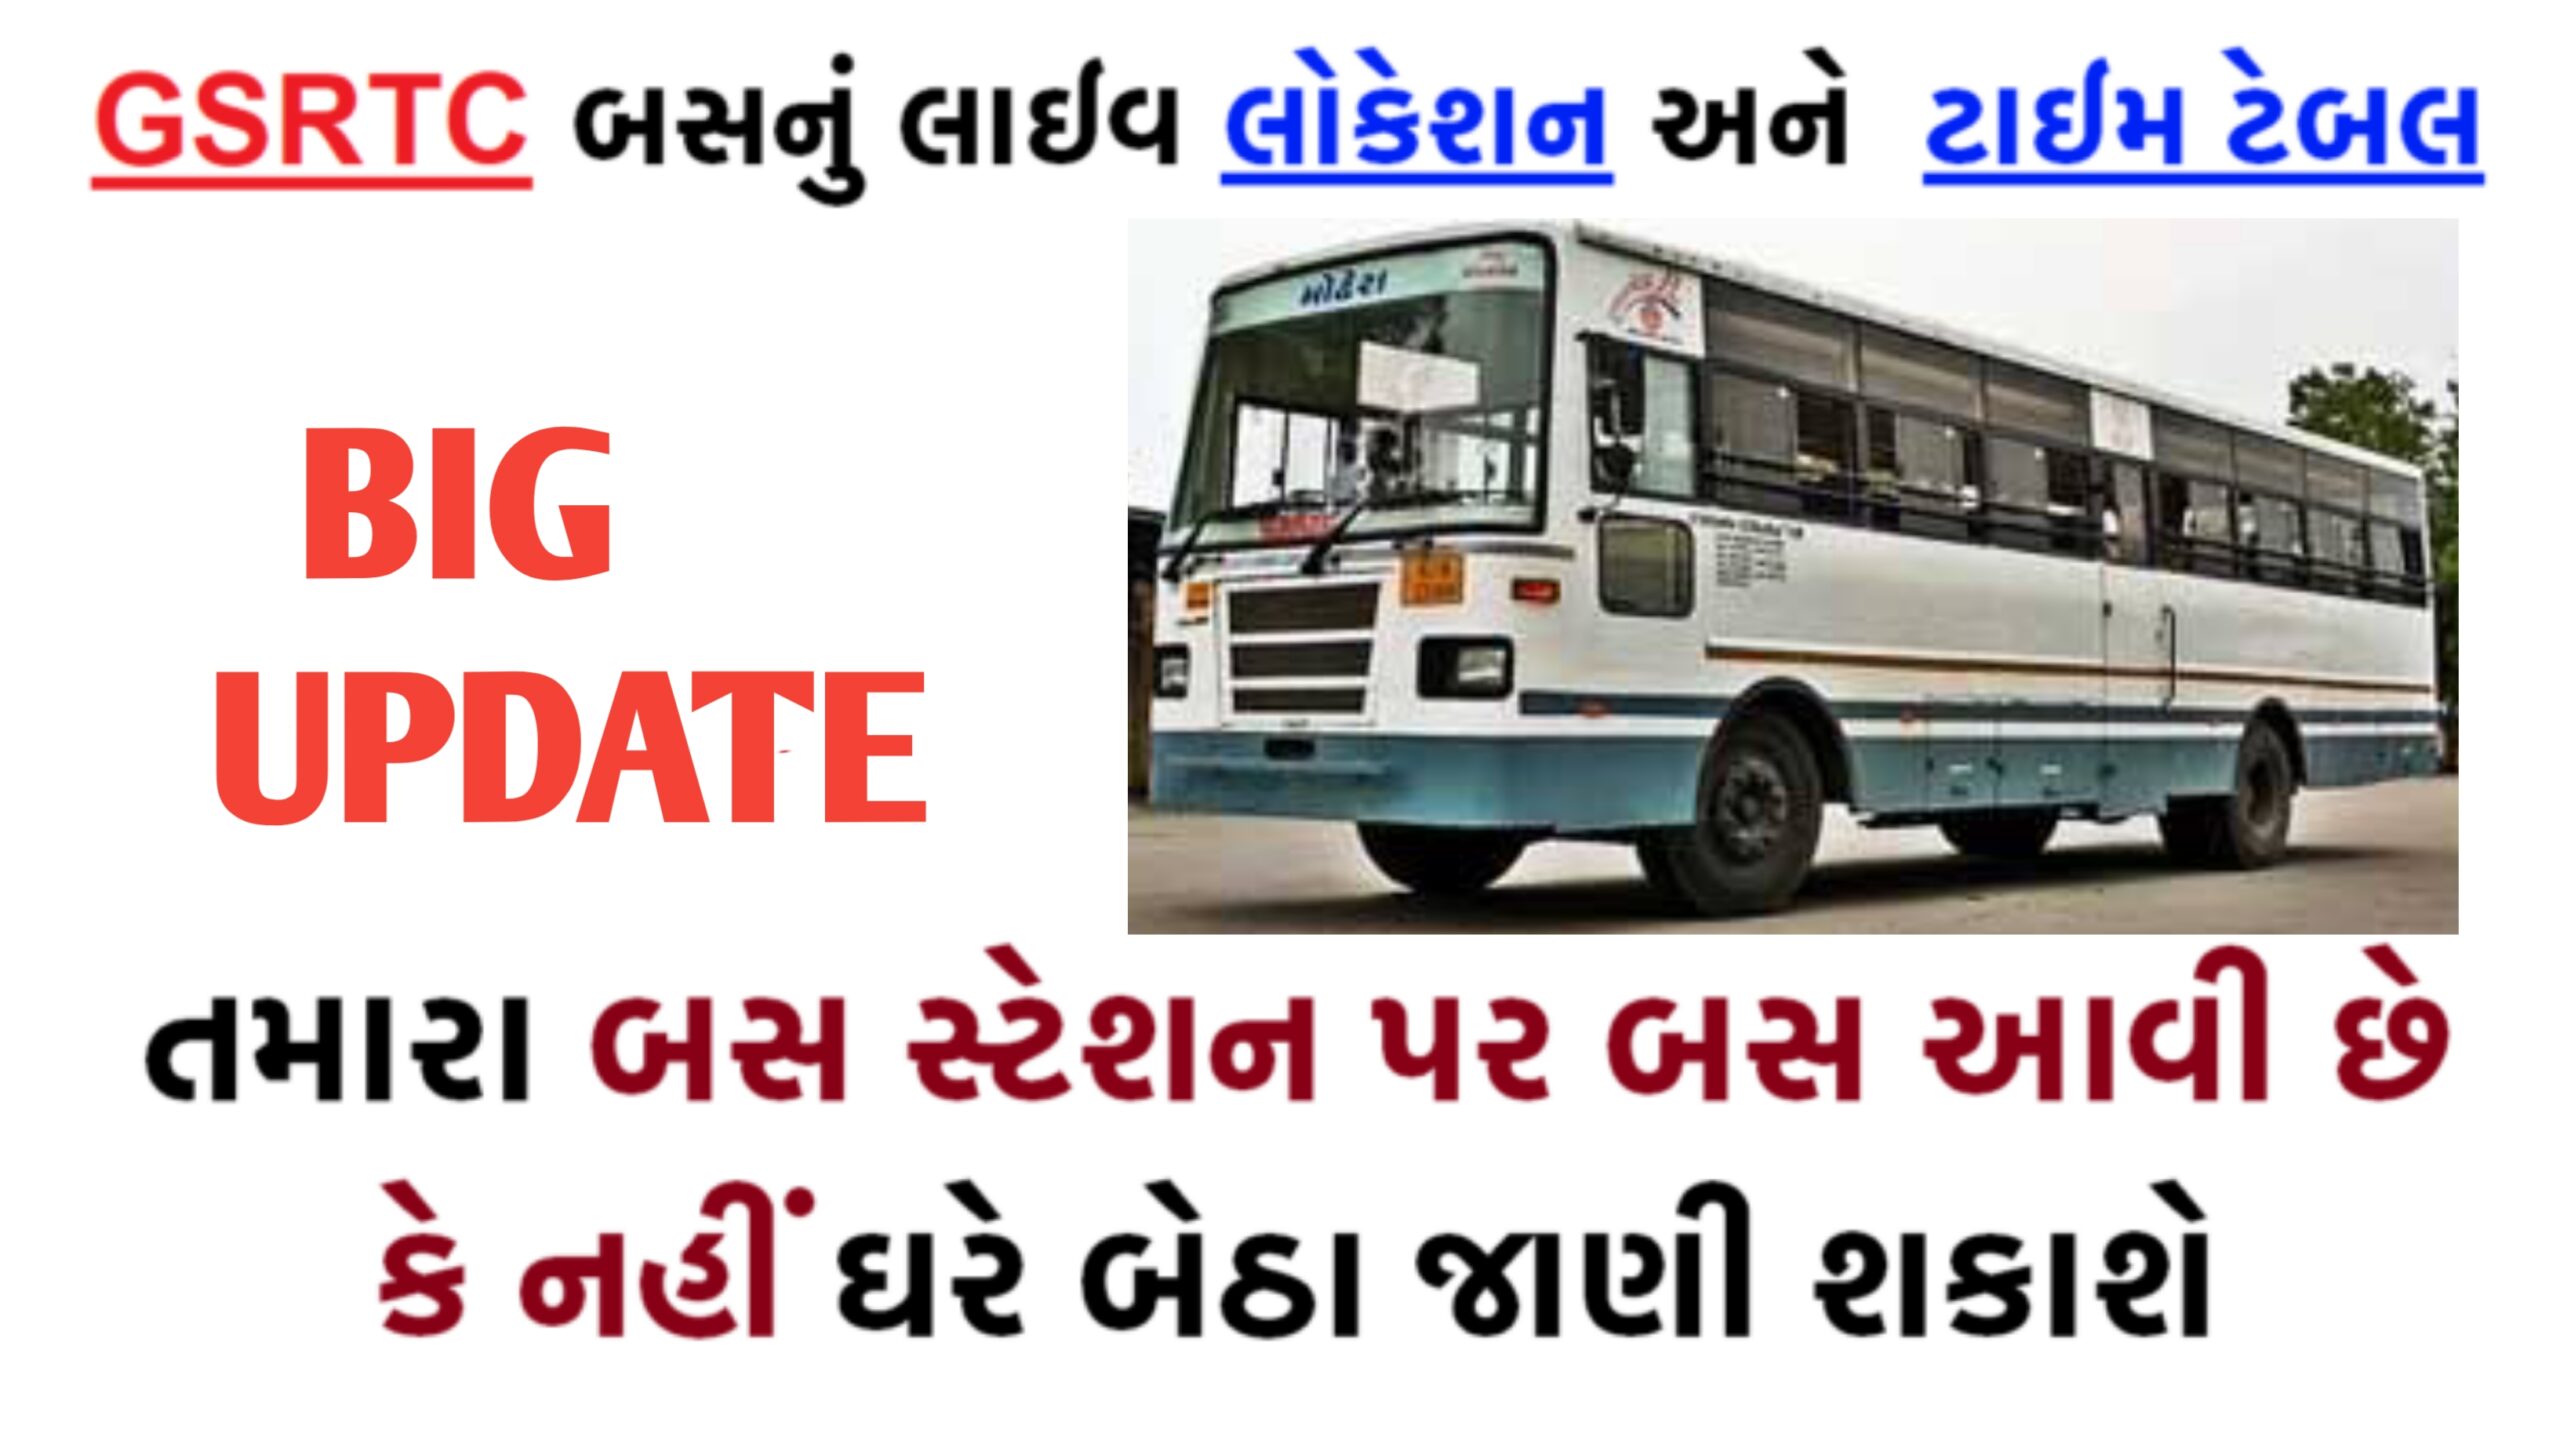 GSRTC Bus Schedule app is with BOOKING facility